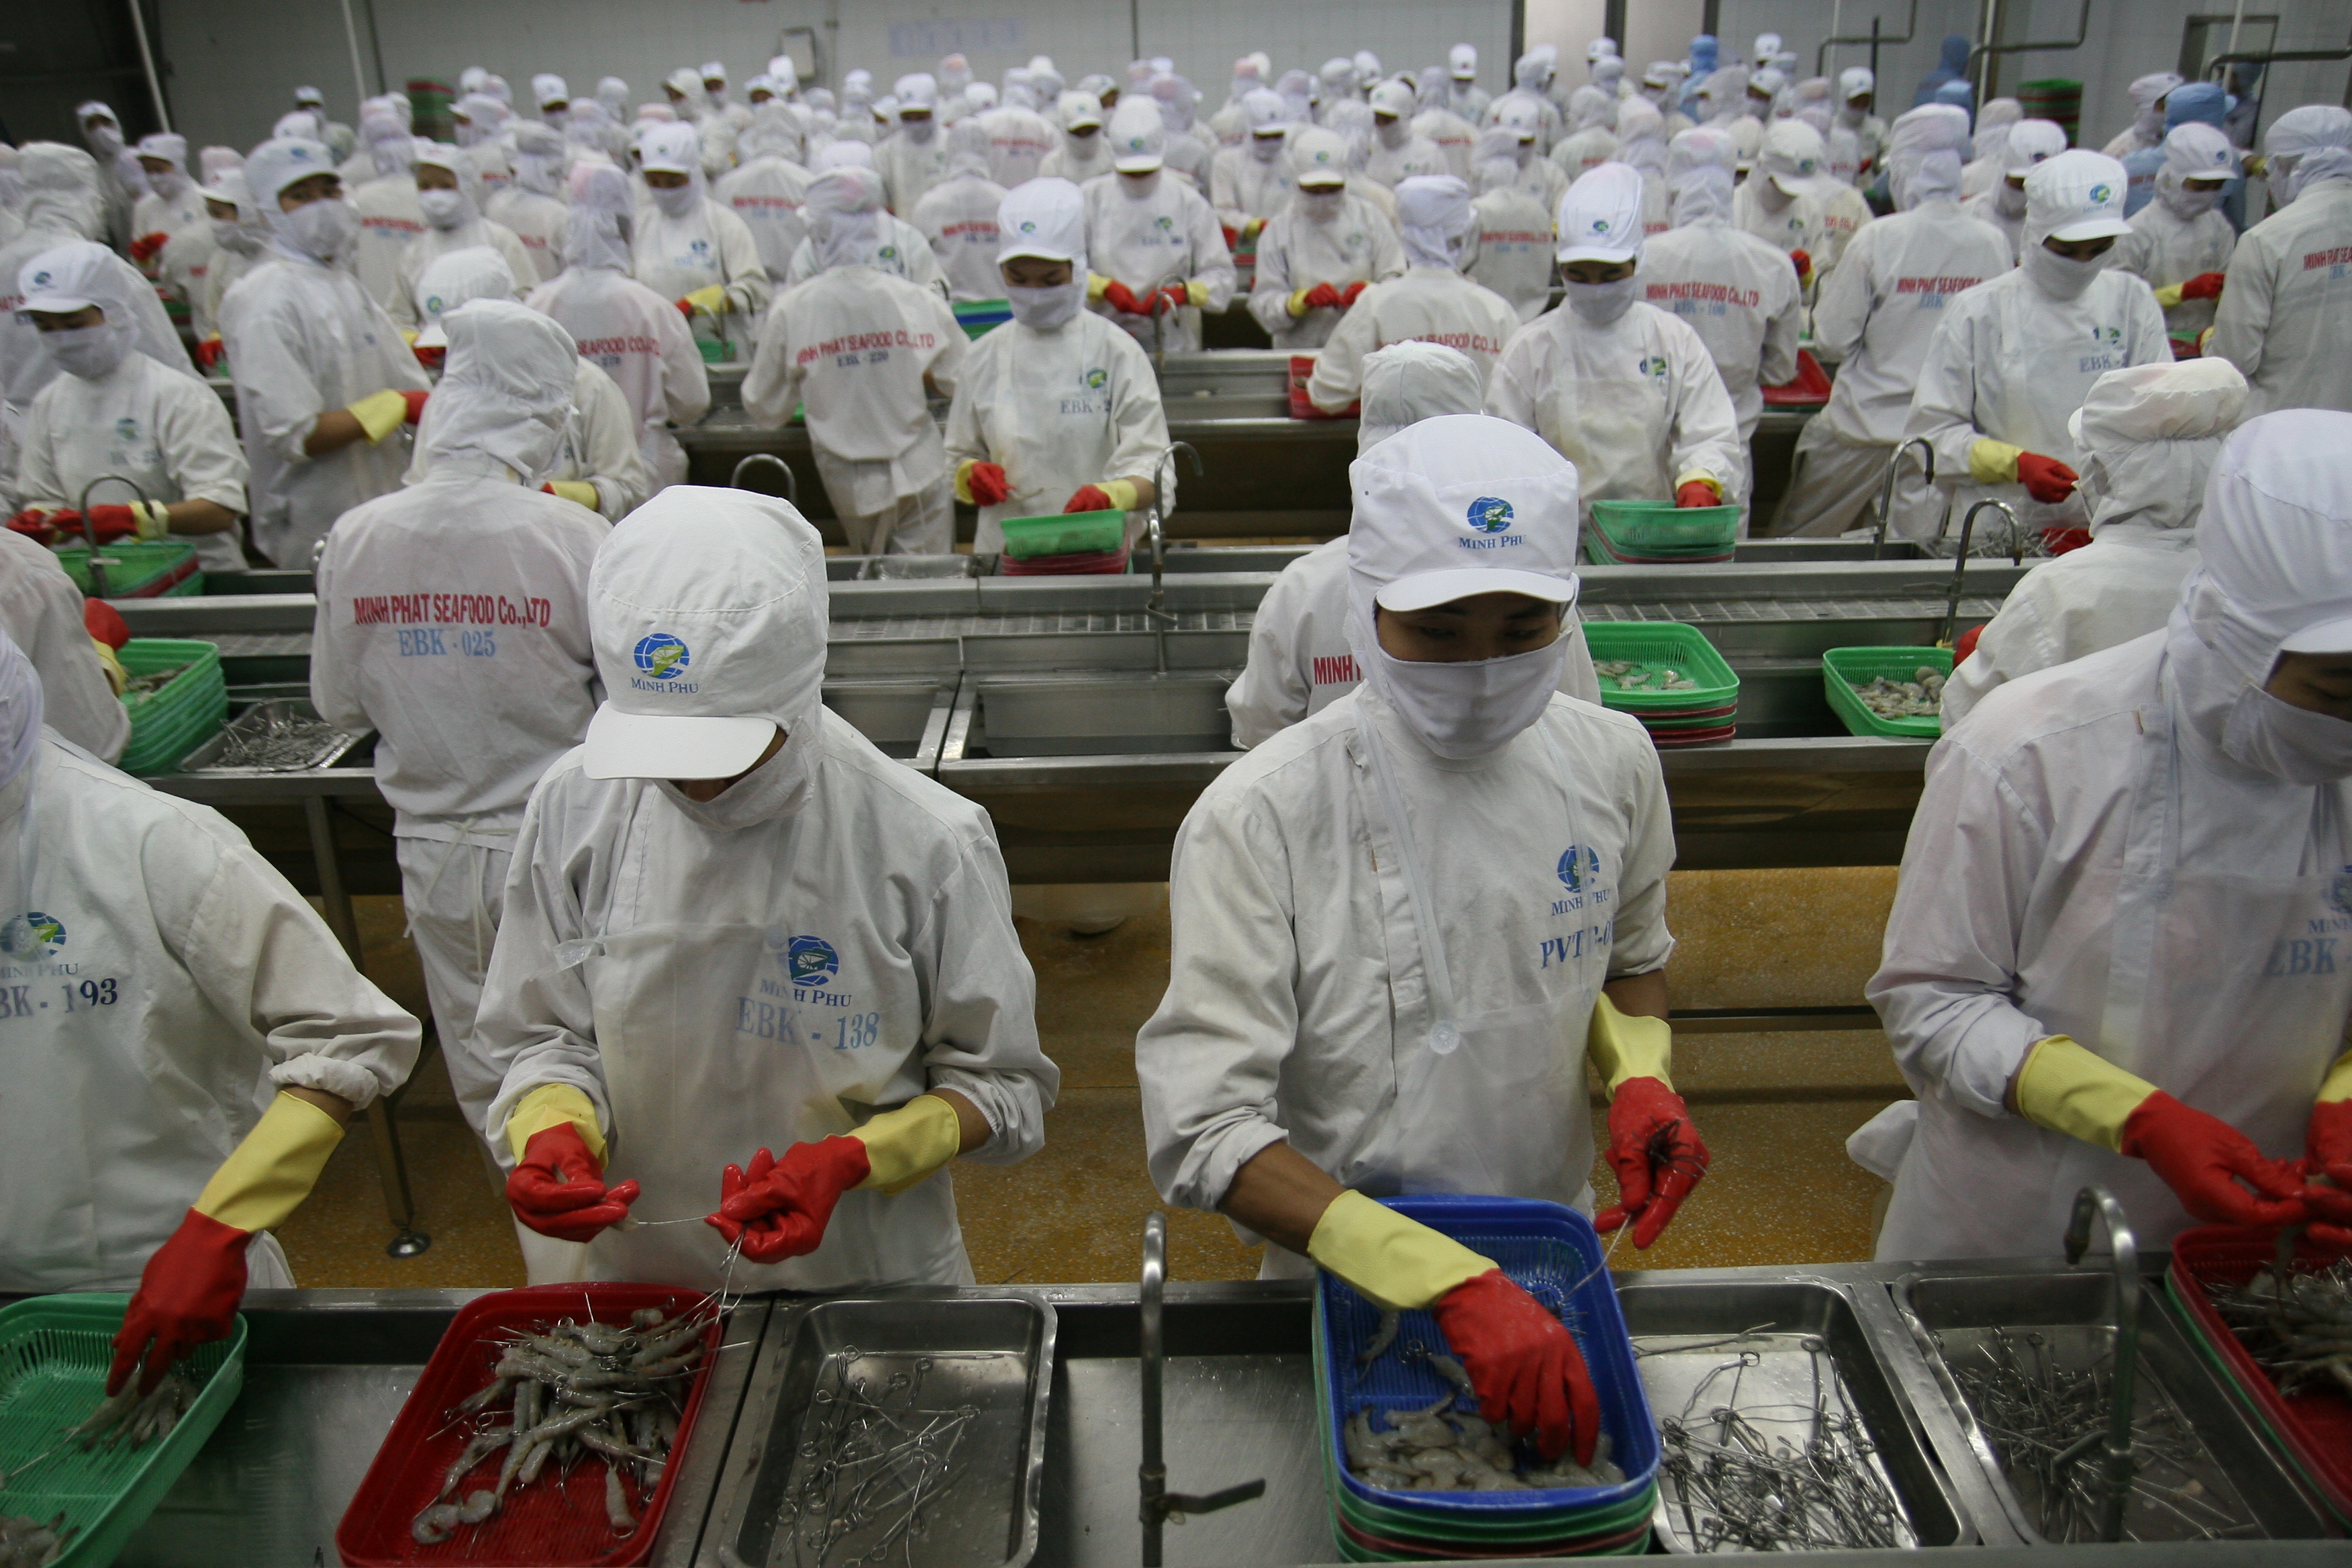 Seafood exports in the first eight months of the year increased by 7